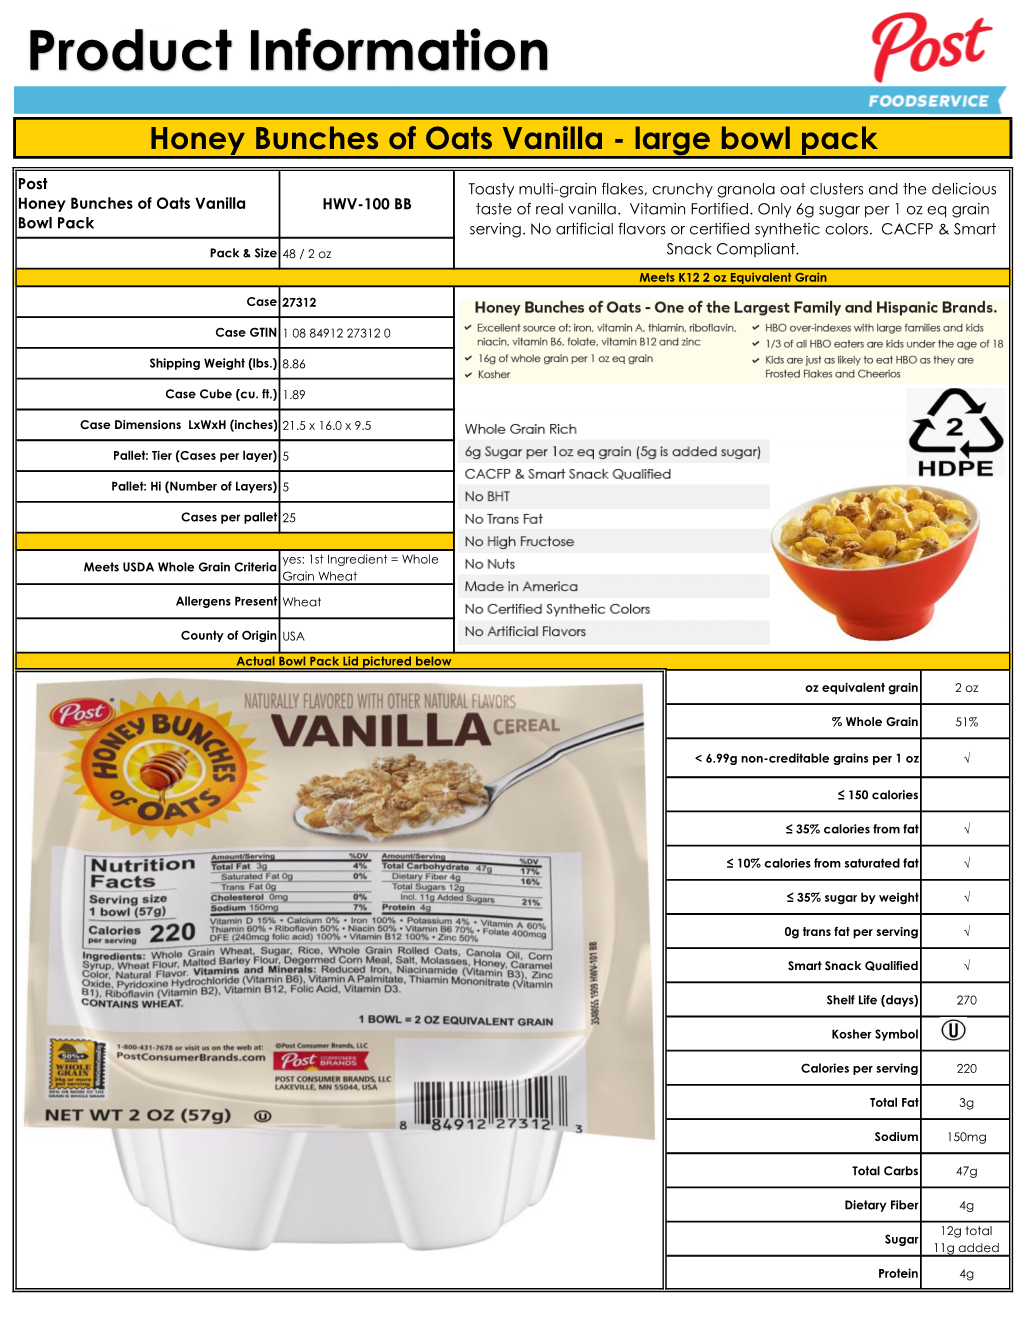 Honey Bunches of Oats Vanilla - Large Bowl Pack